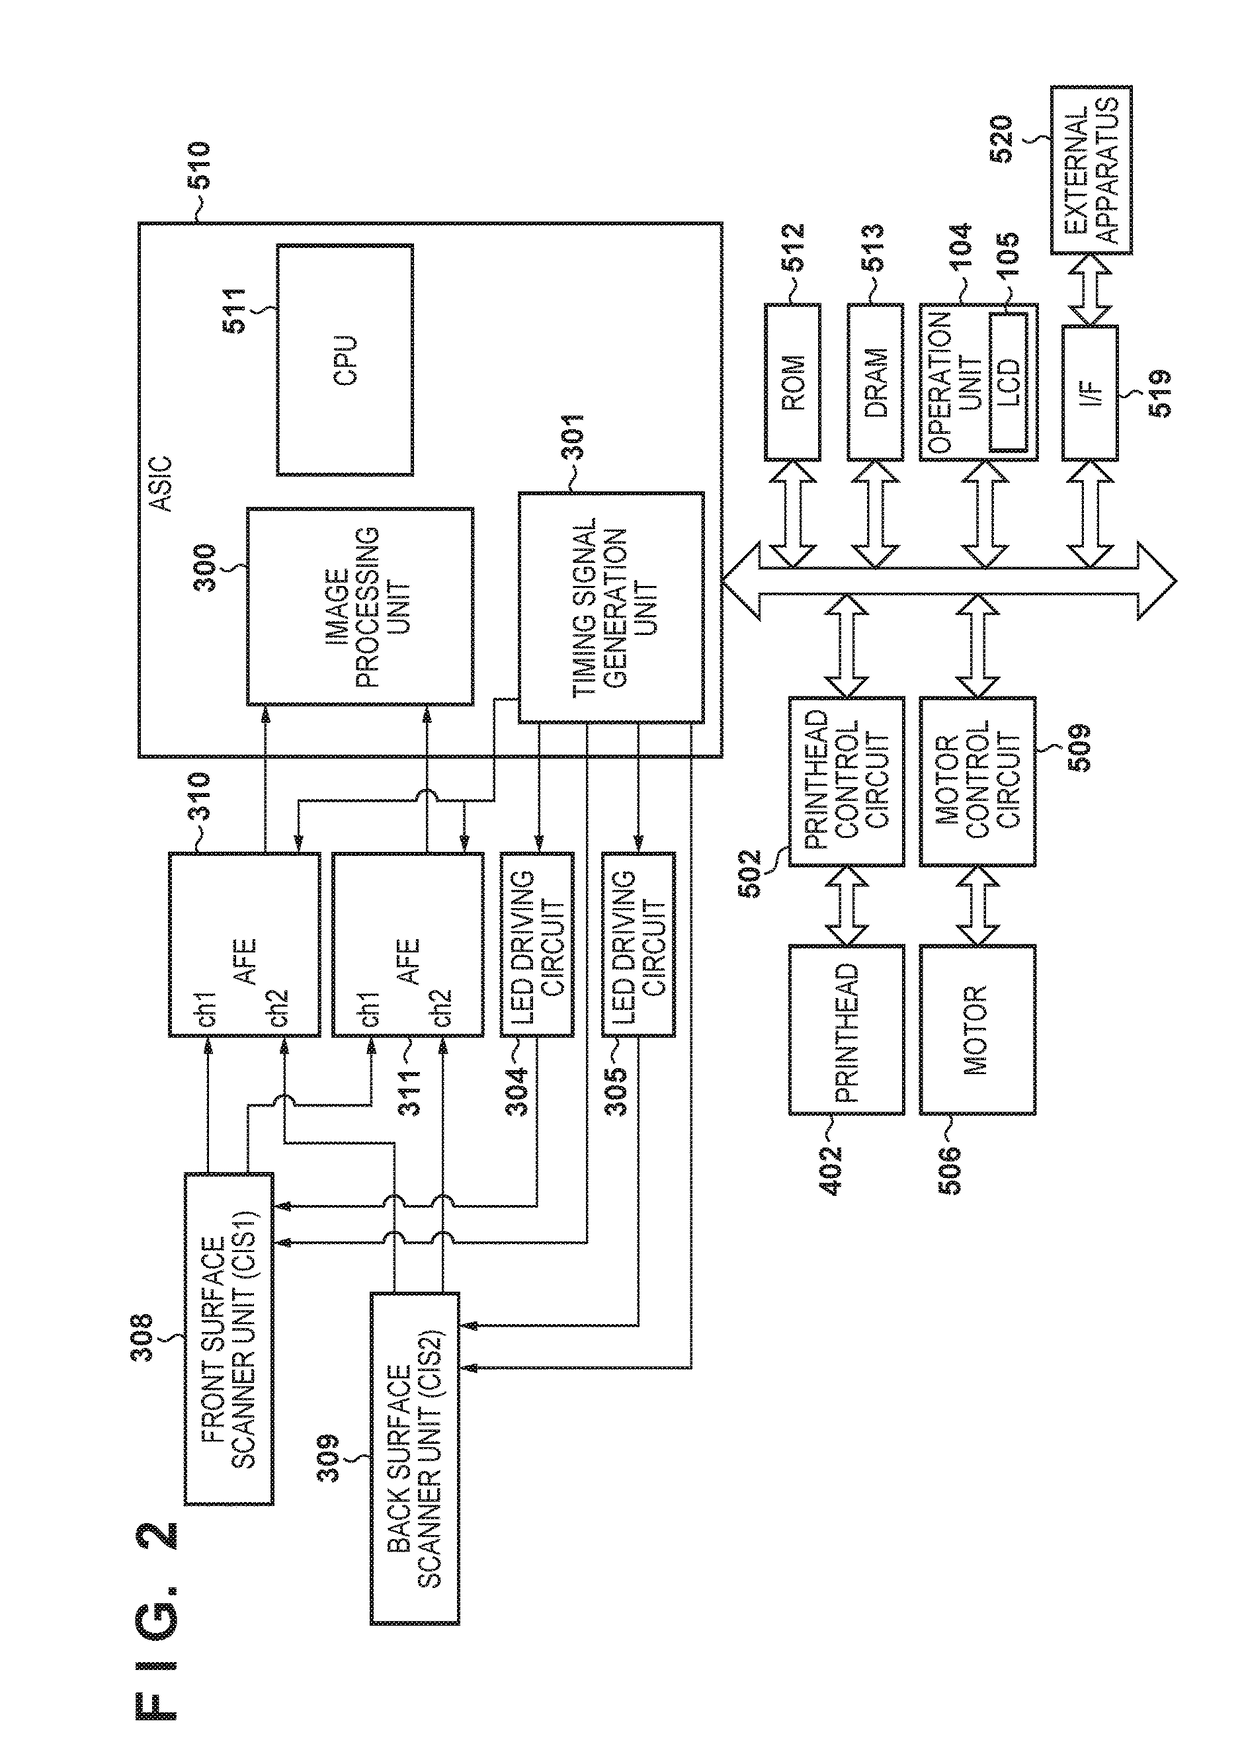 Image scanning apparatus, control method therefor, and multifunction apparatus